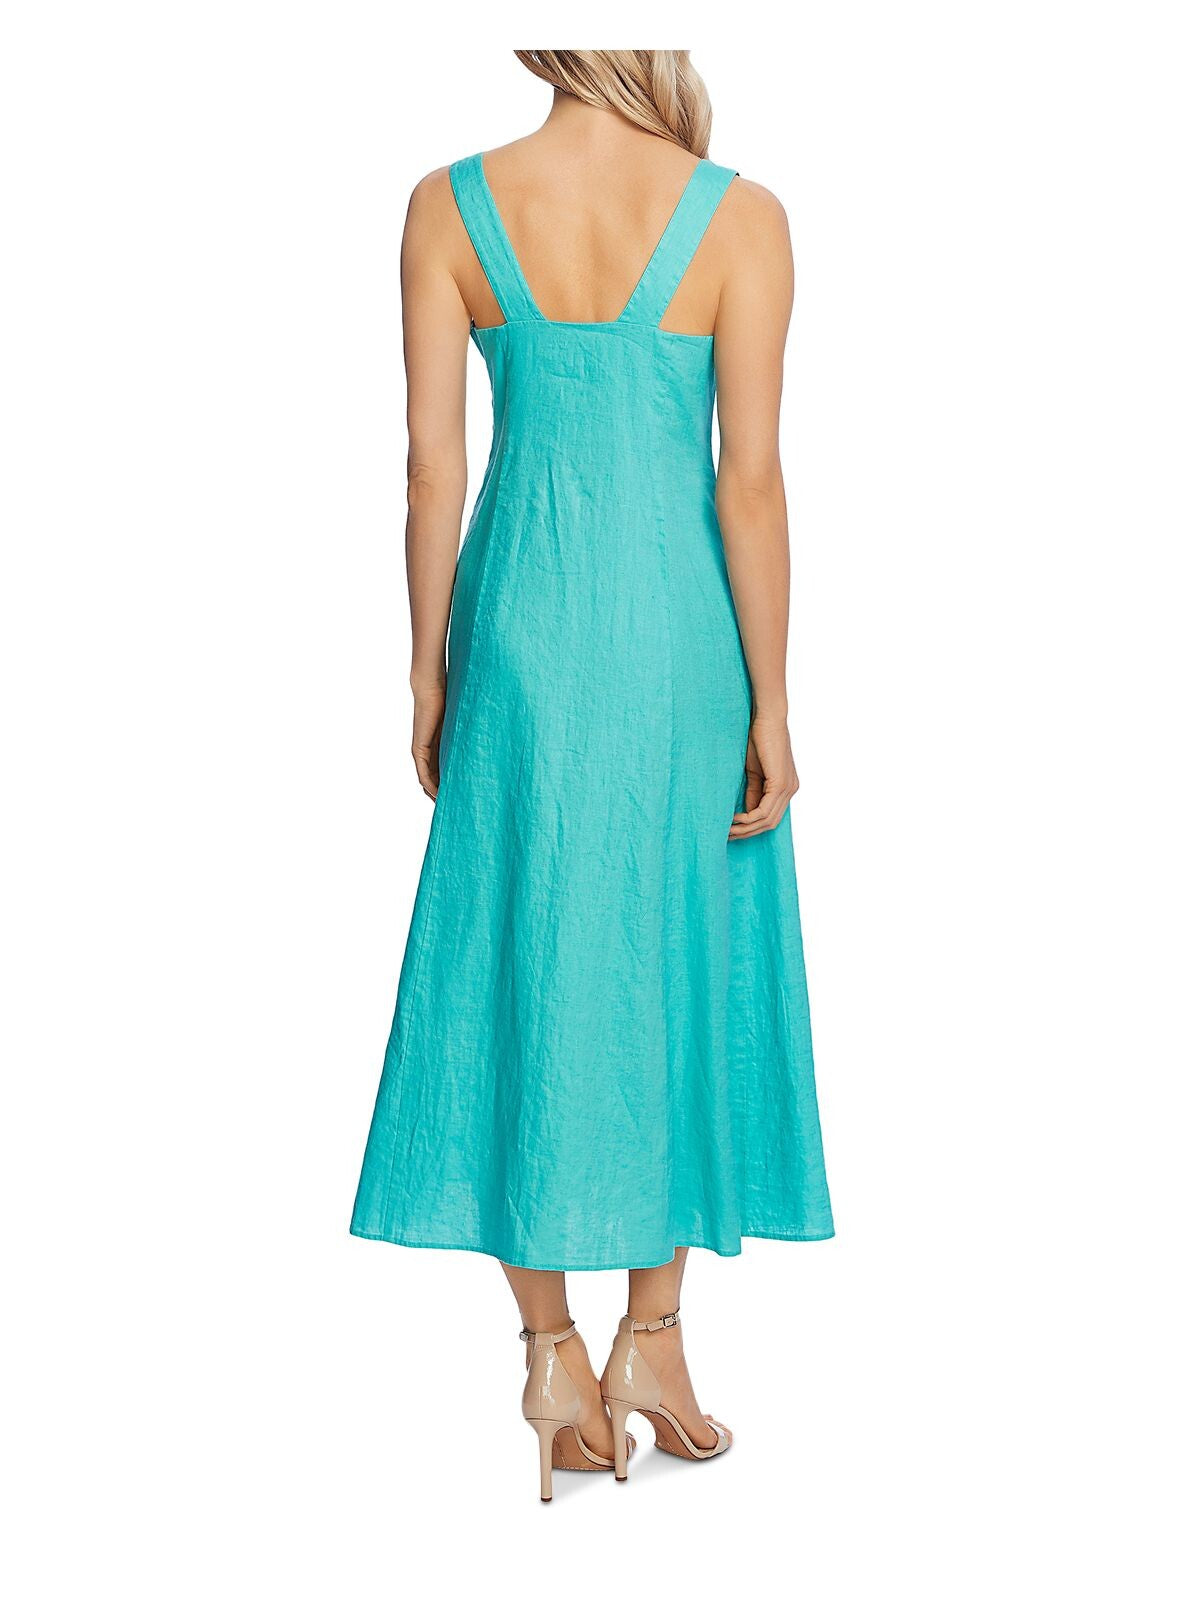 VINCE CAMUTO Womens Turquoise Sleeveless V Neck Midi Fit + Flare Dress XL